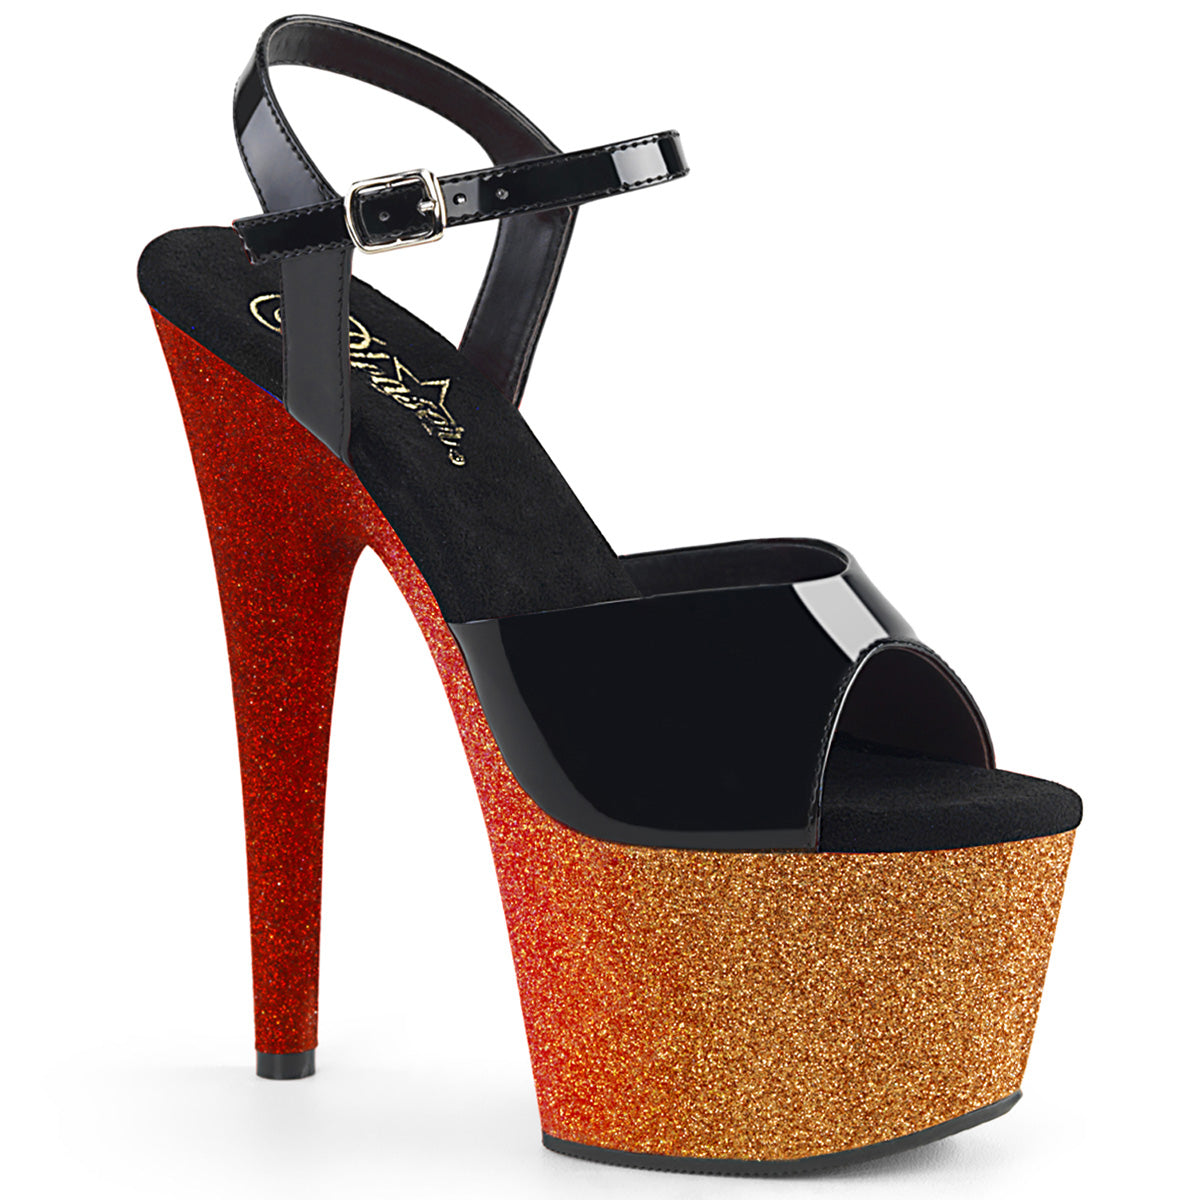 Pleaser Sandalias para mujer ADORE-709ombre Blk / Rose Gold-Red Ombre